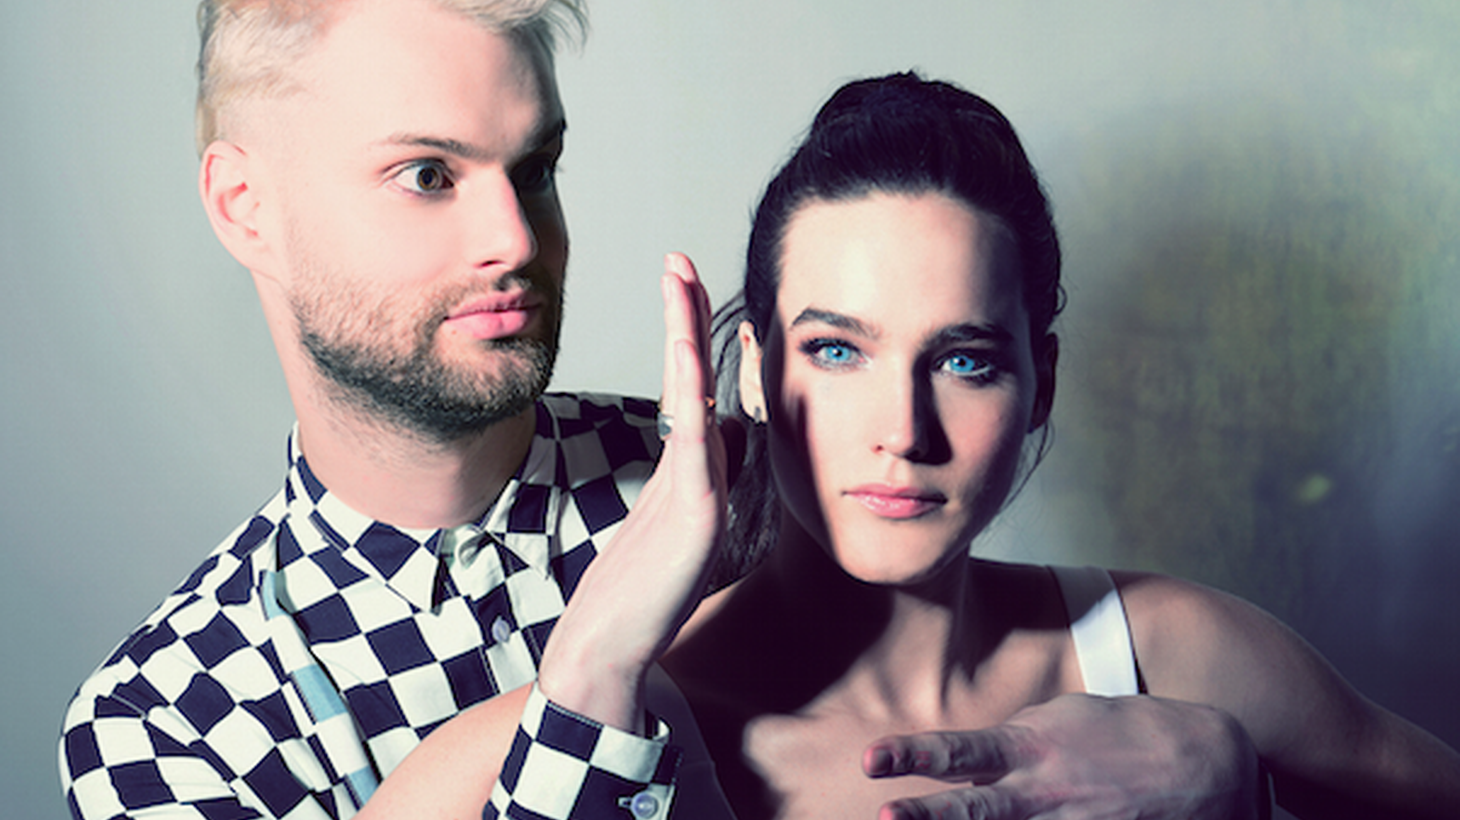 Dynamic duo Sofi Tukker have found an impassioned following for their infectious dance pop sound. They just released their debut full length Treehouse and will return to our studio for a special 4-song set at 10am.